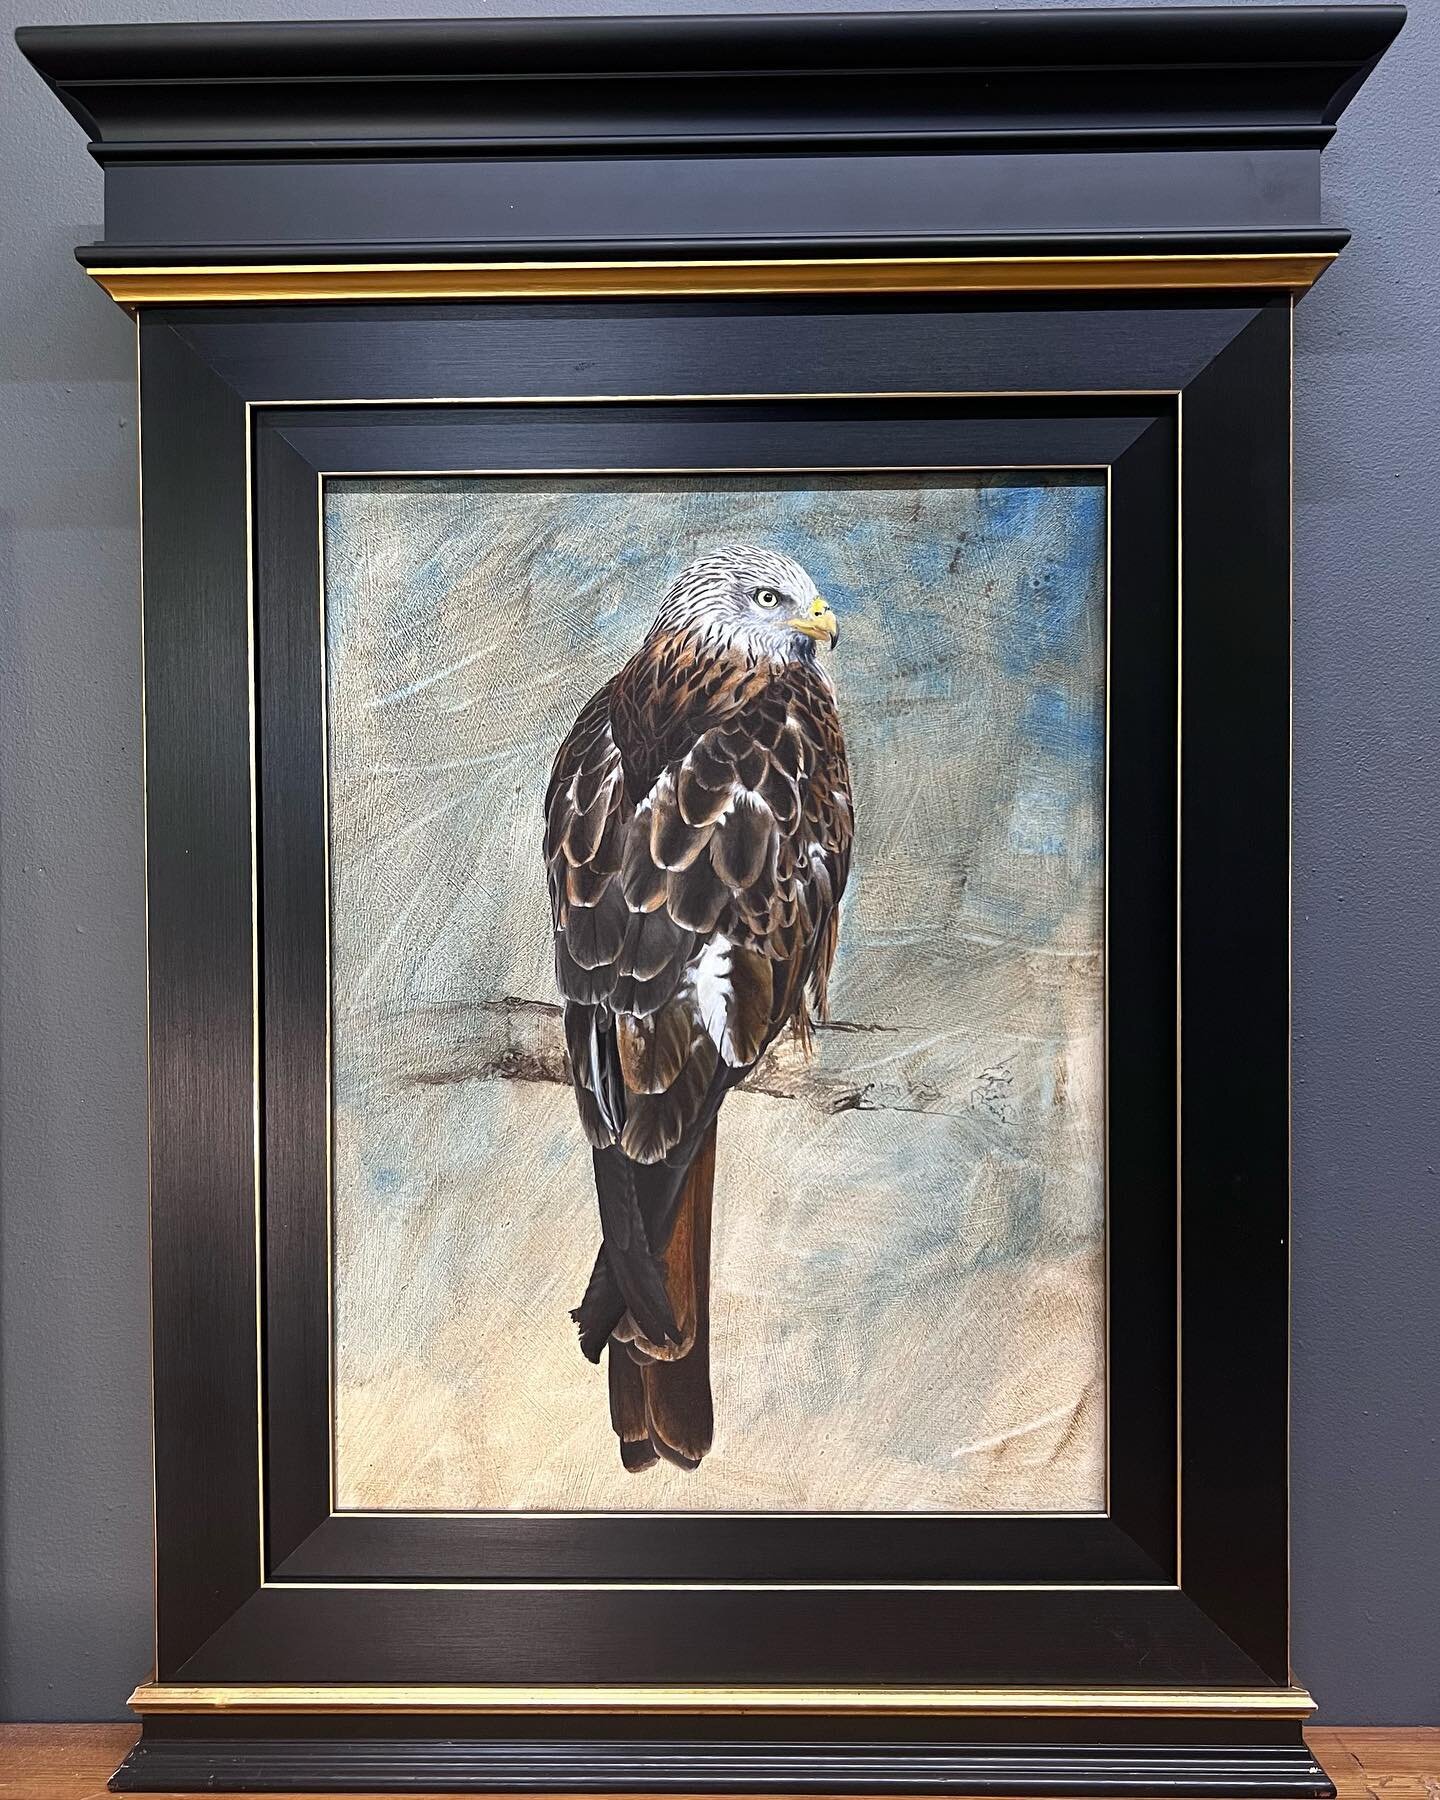 A bit of &ldquo;presentation experimentation&rdquo; in my workshop today! I&rsquo;ve had a frame like this in mind for a while, glad I&rsquo;ve finally done it and, it was good fun to play around with! Oooh&hellip;. The possibilities!!! #redkite #red